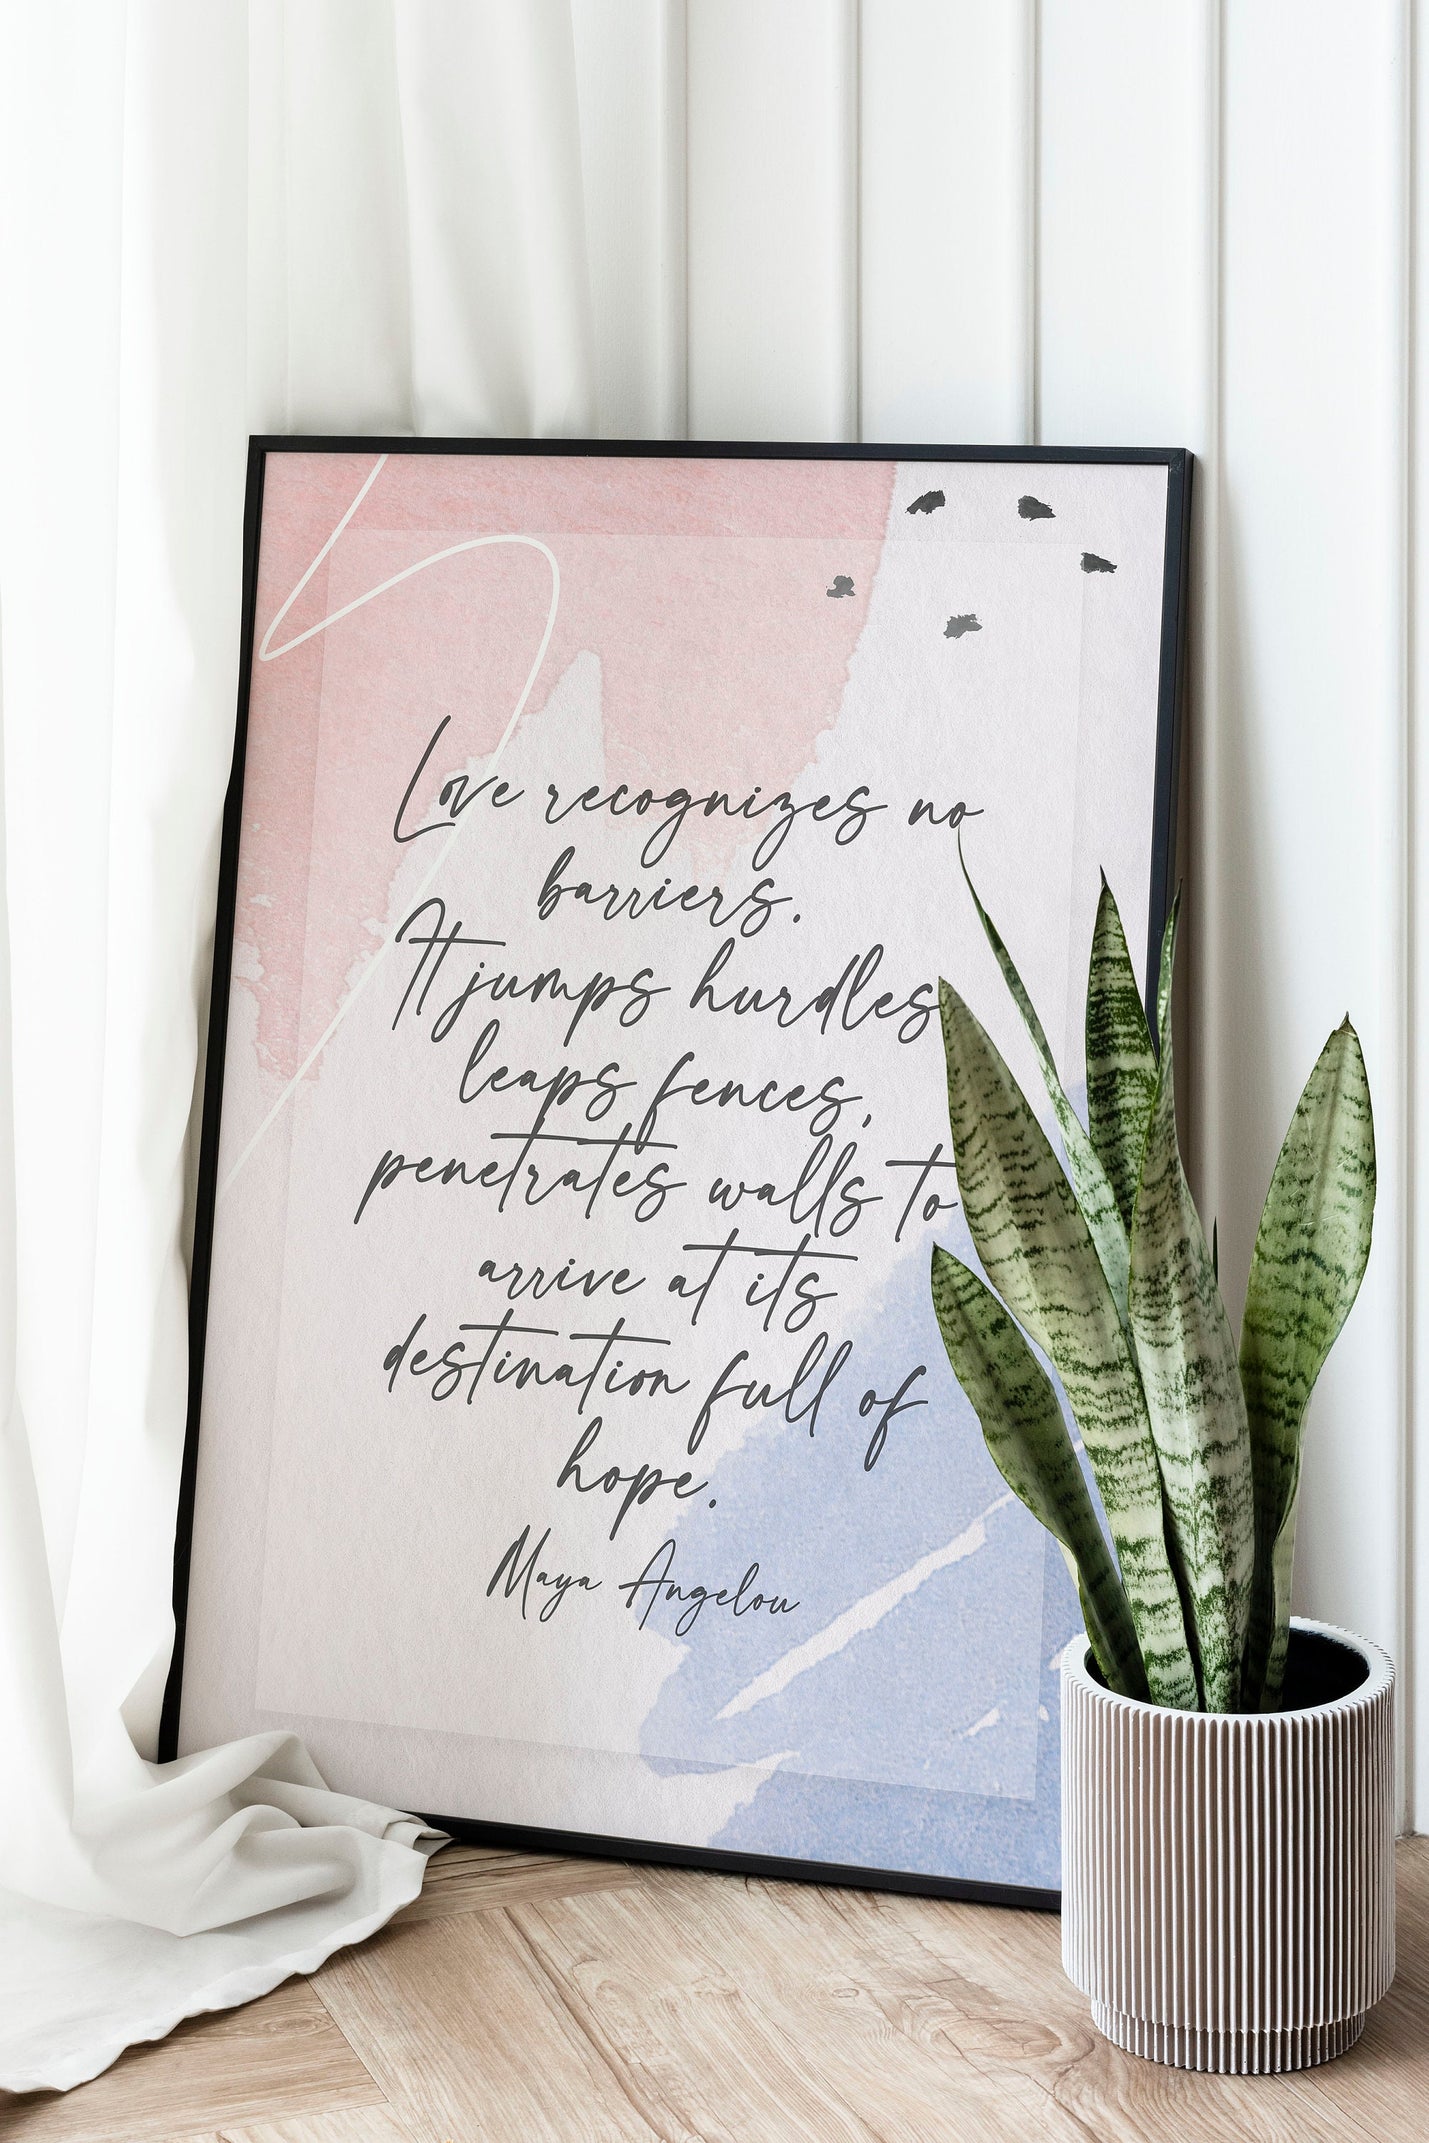 Maya Angelou Love Recognizes No Barriers Inspirational Quote Print, Watercolor Minimalist Art Unframed